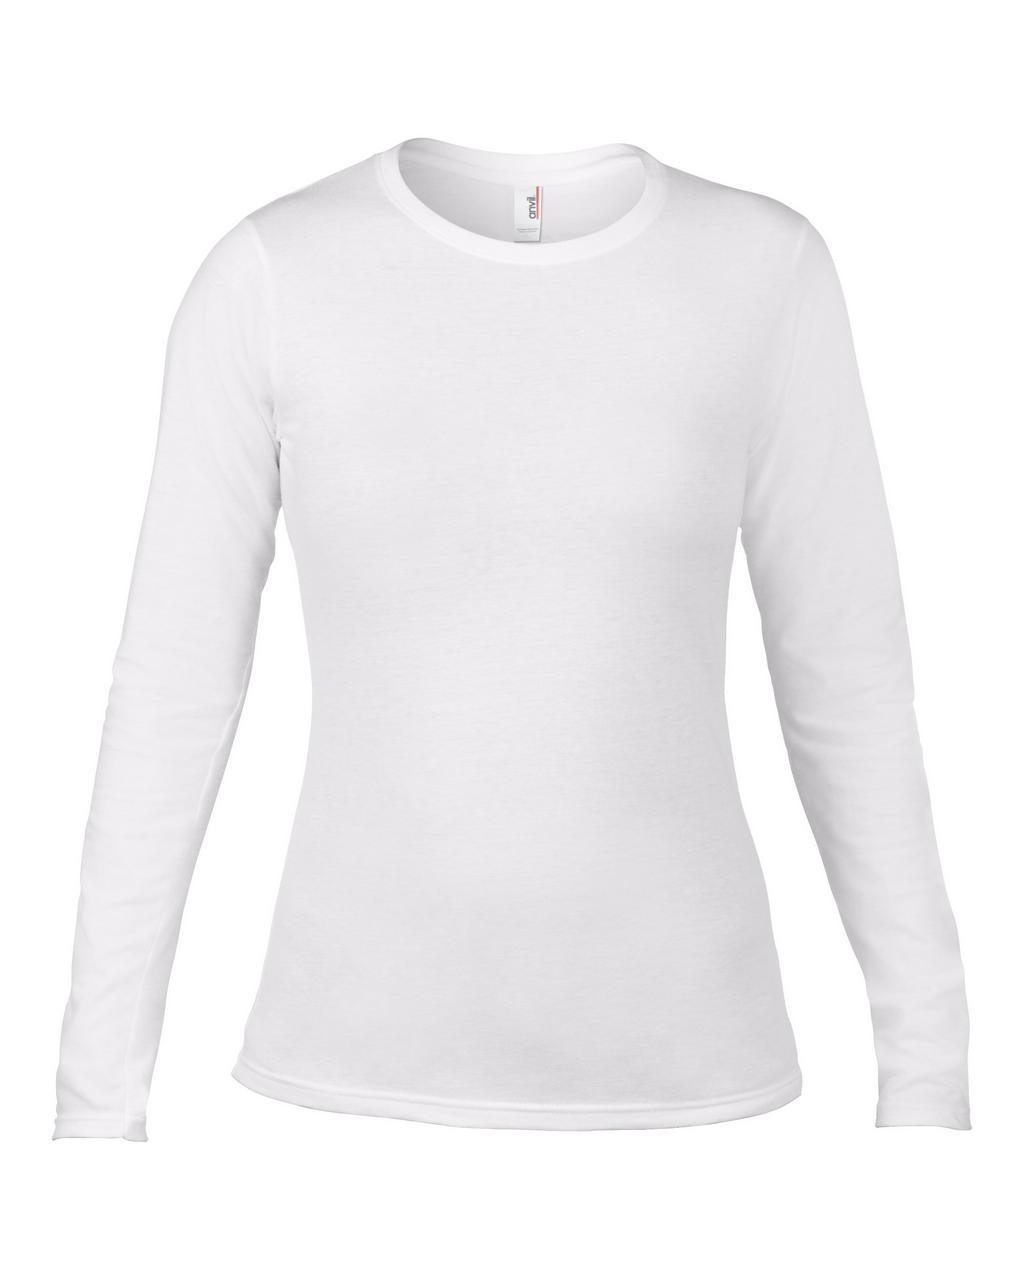 WOMEN’S FASHION BASIC FITTED LONG SLEEVE TEE